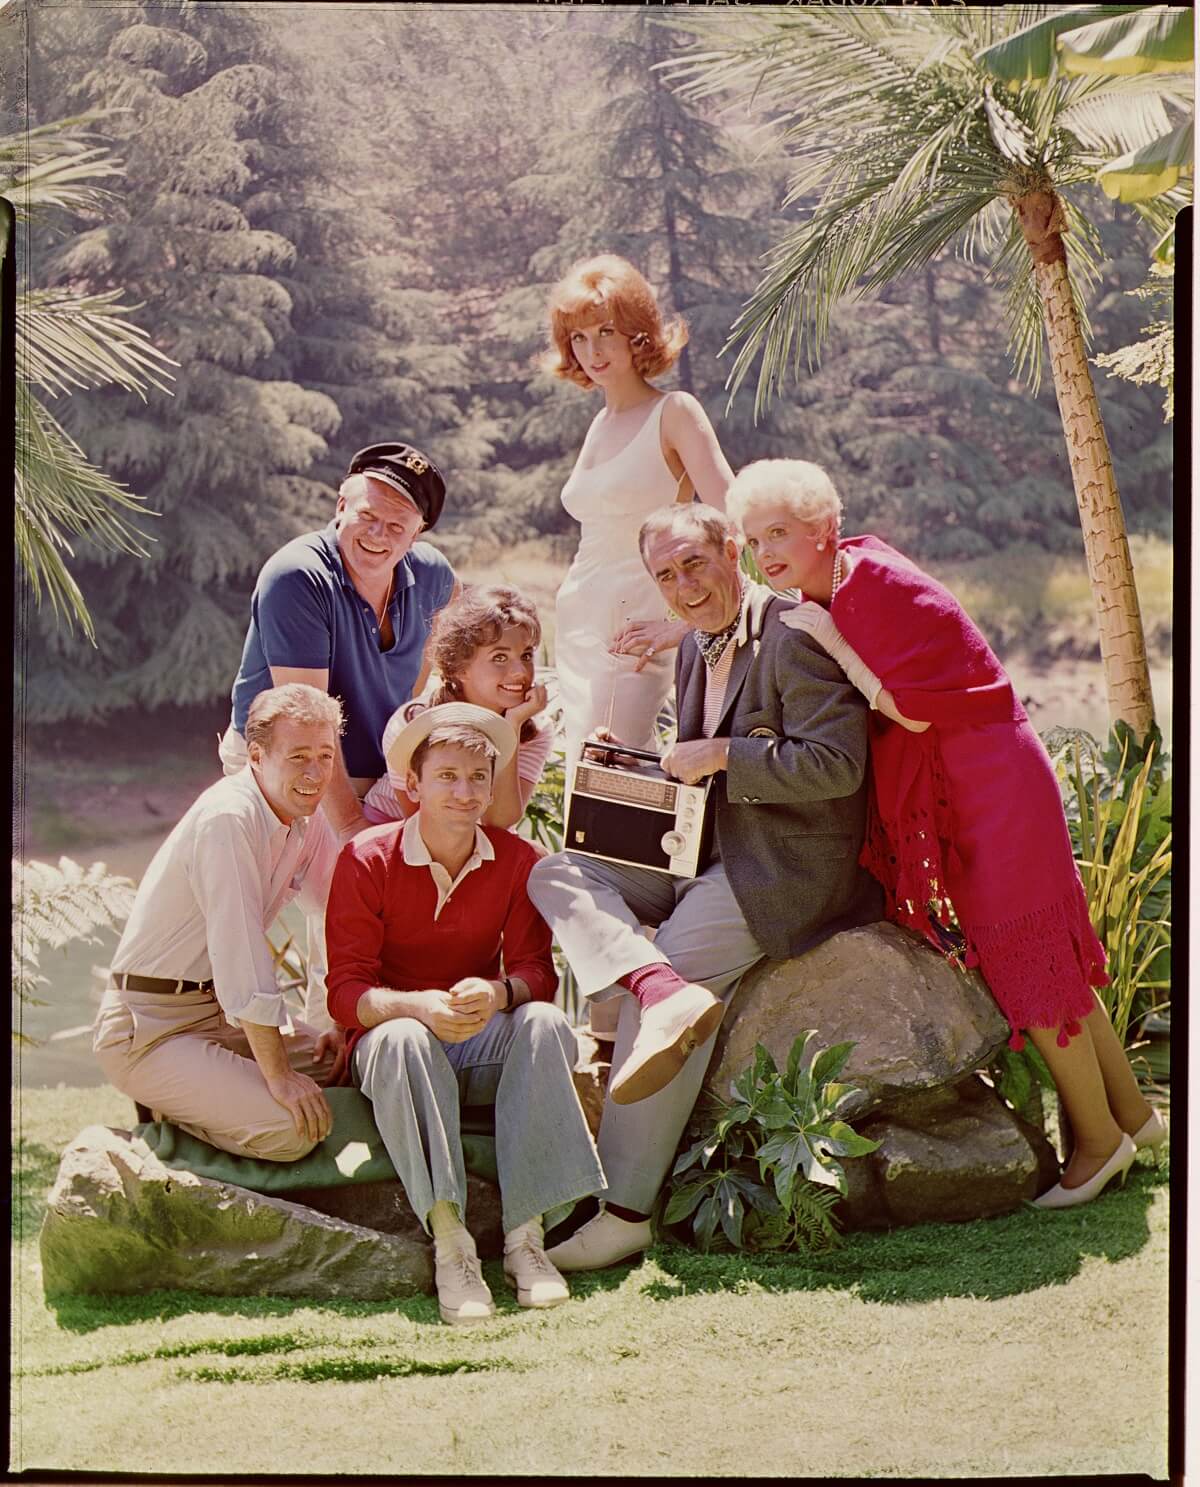 'Gilligan's Island' cast members posing together on set for a promotional photo.